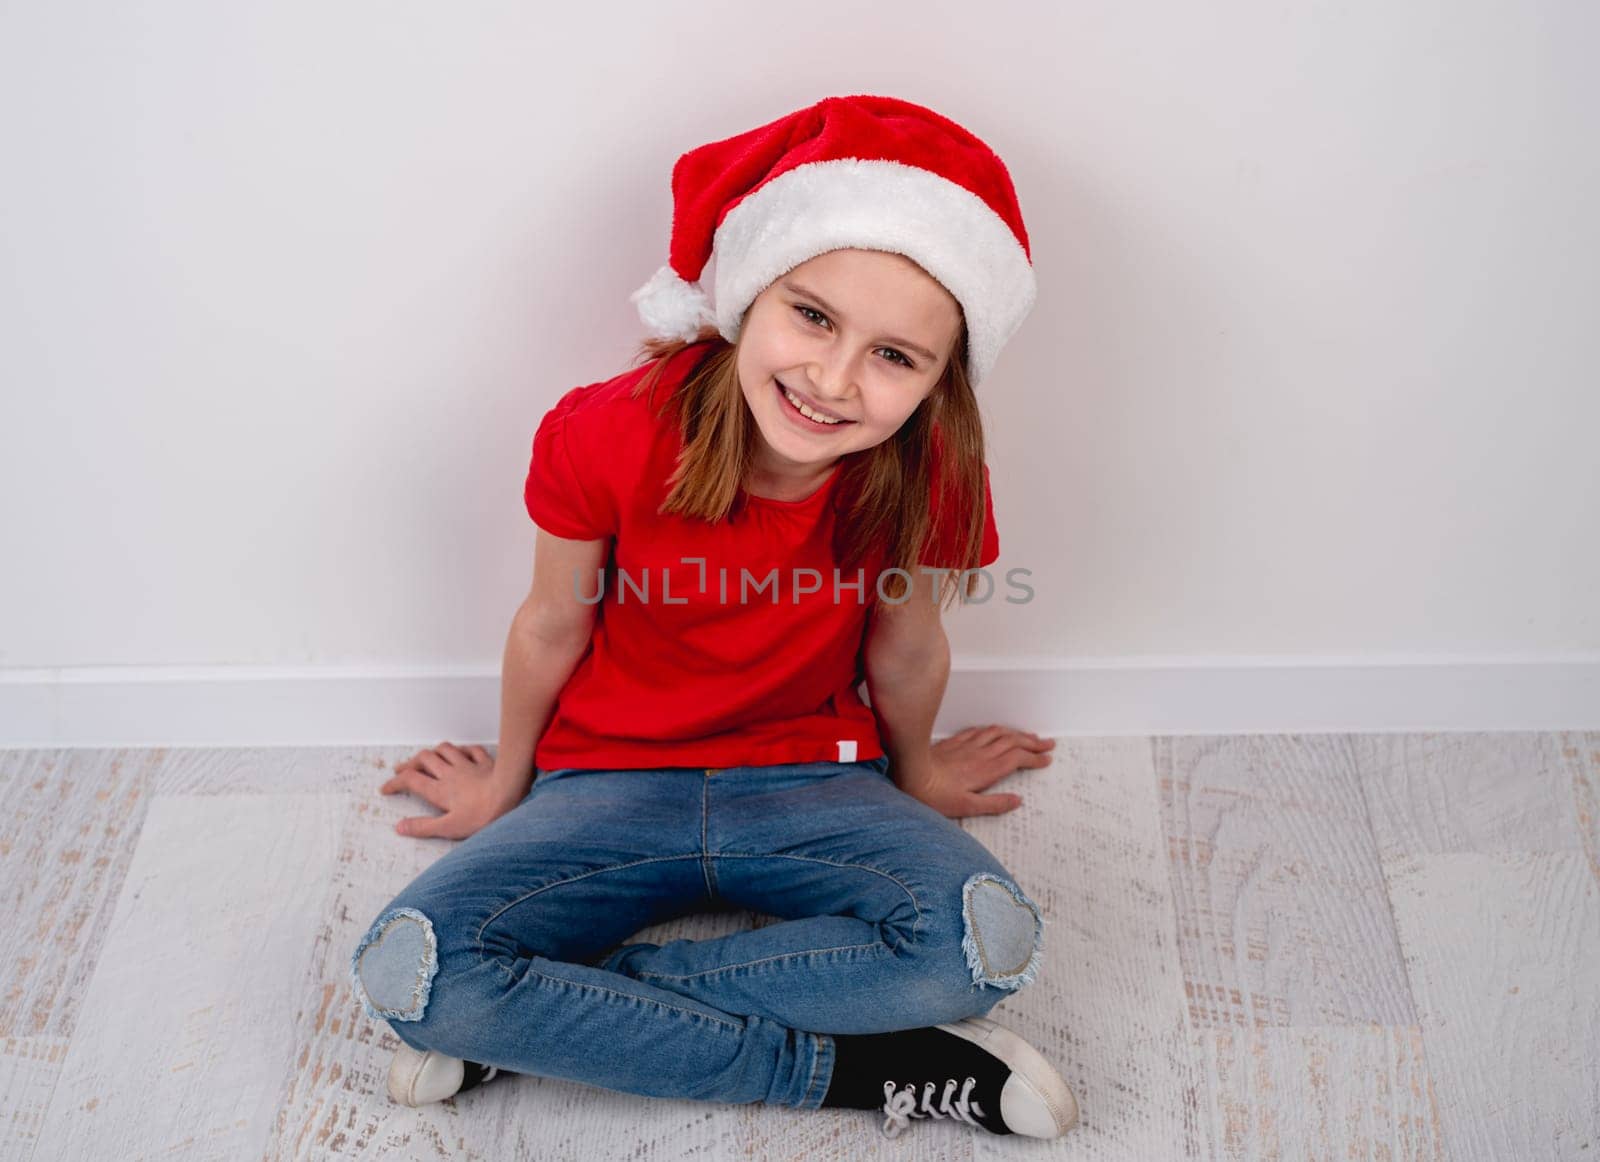 Little Girl In Red Shirt And Santa Hat Sitting On Floor For Christmas Photo On White Background by tan4ikk1